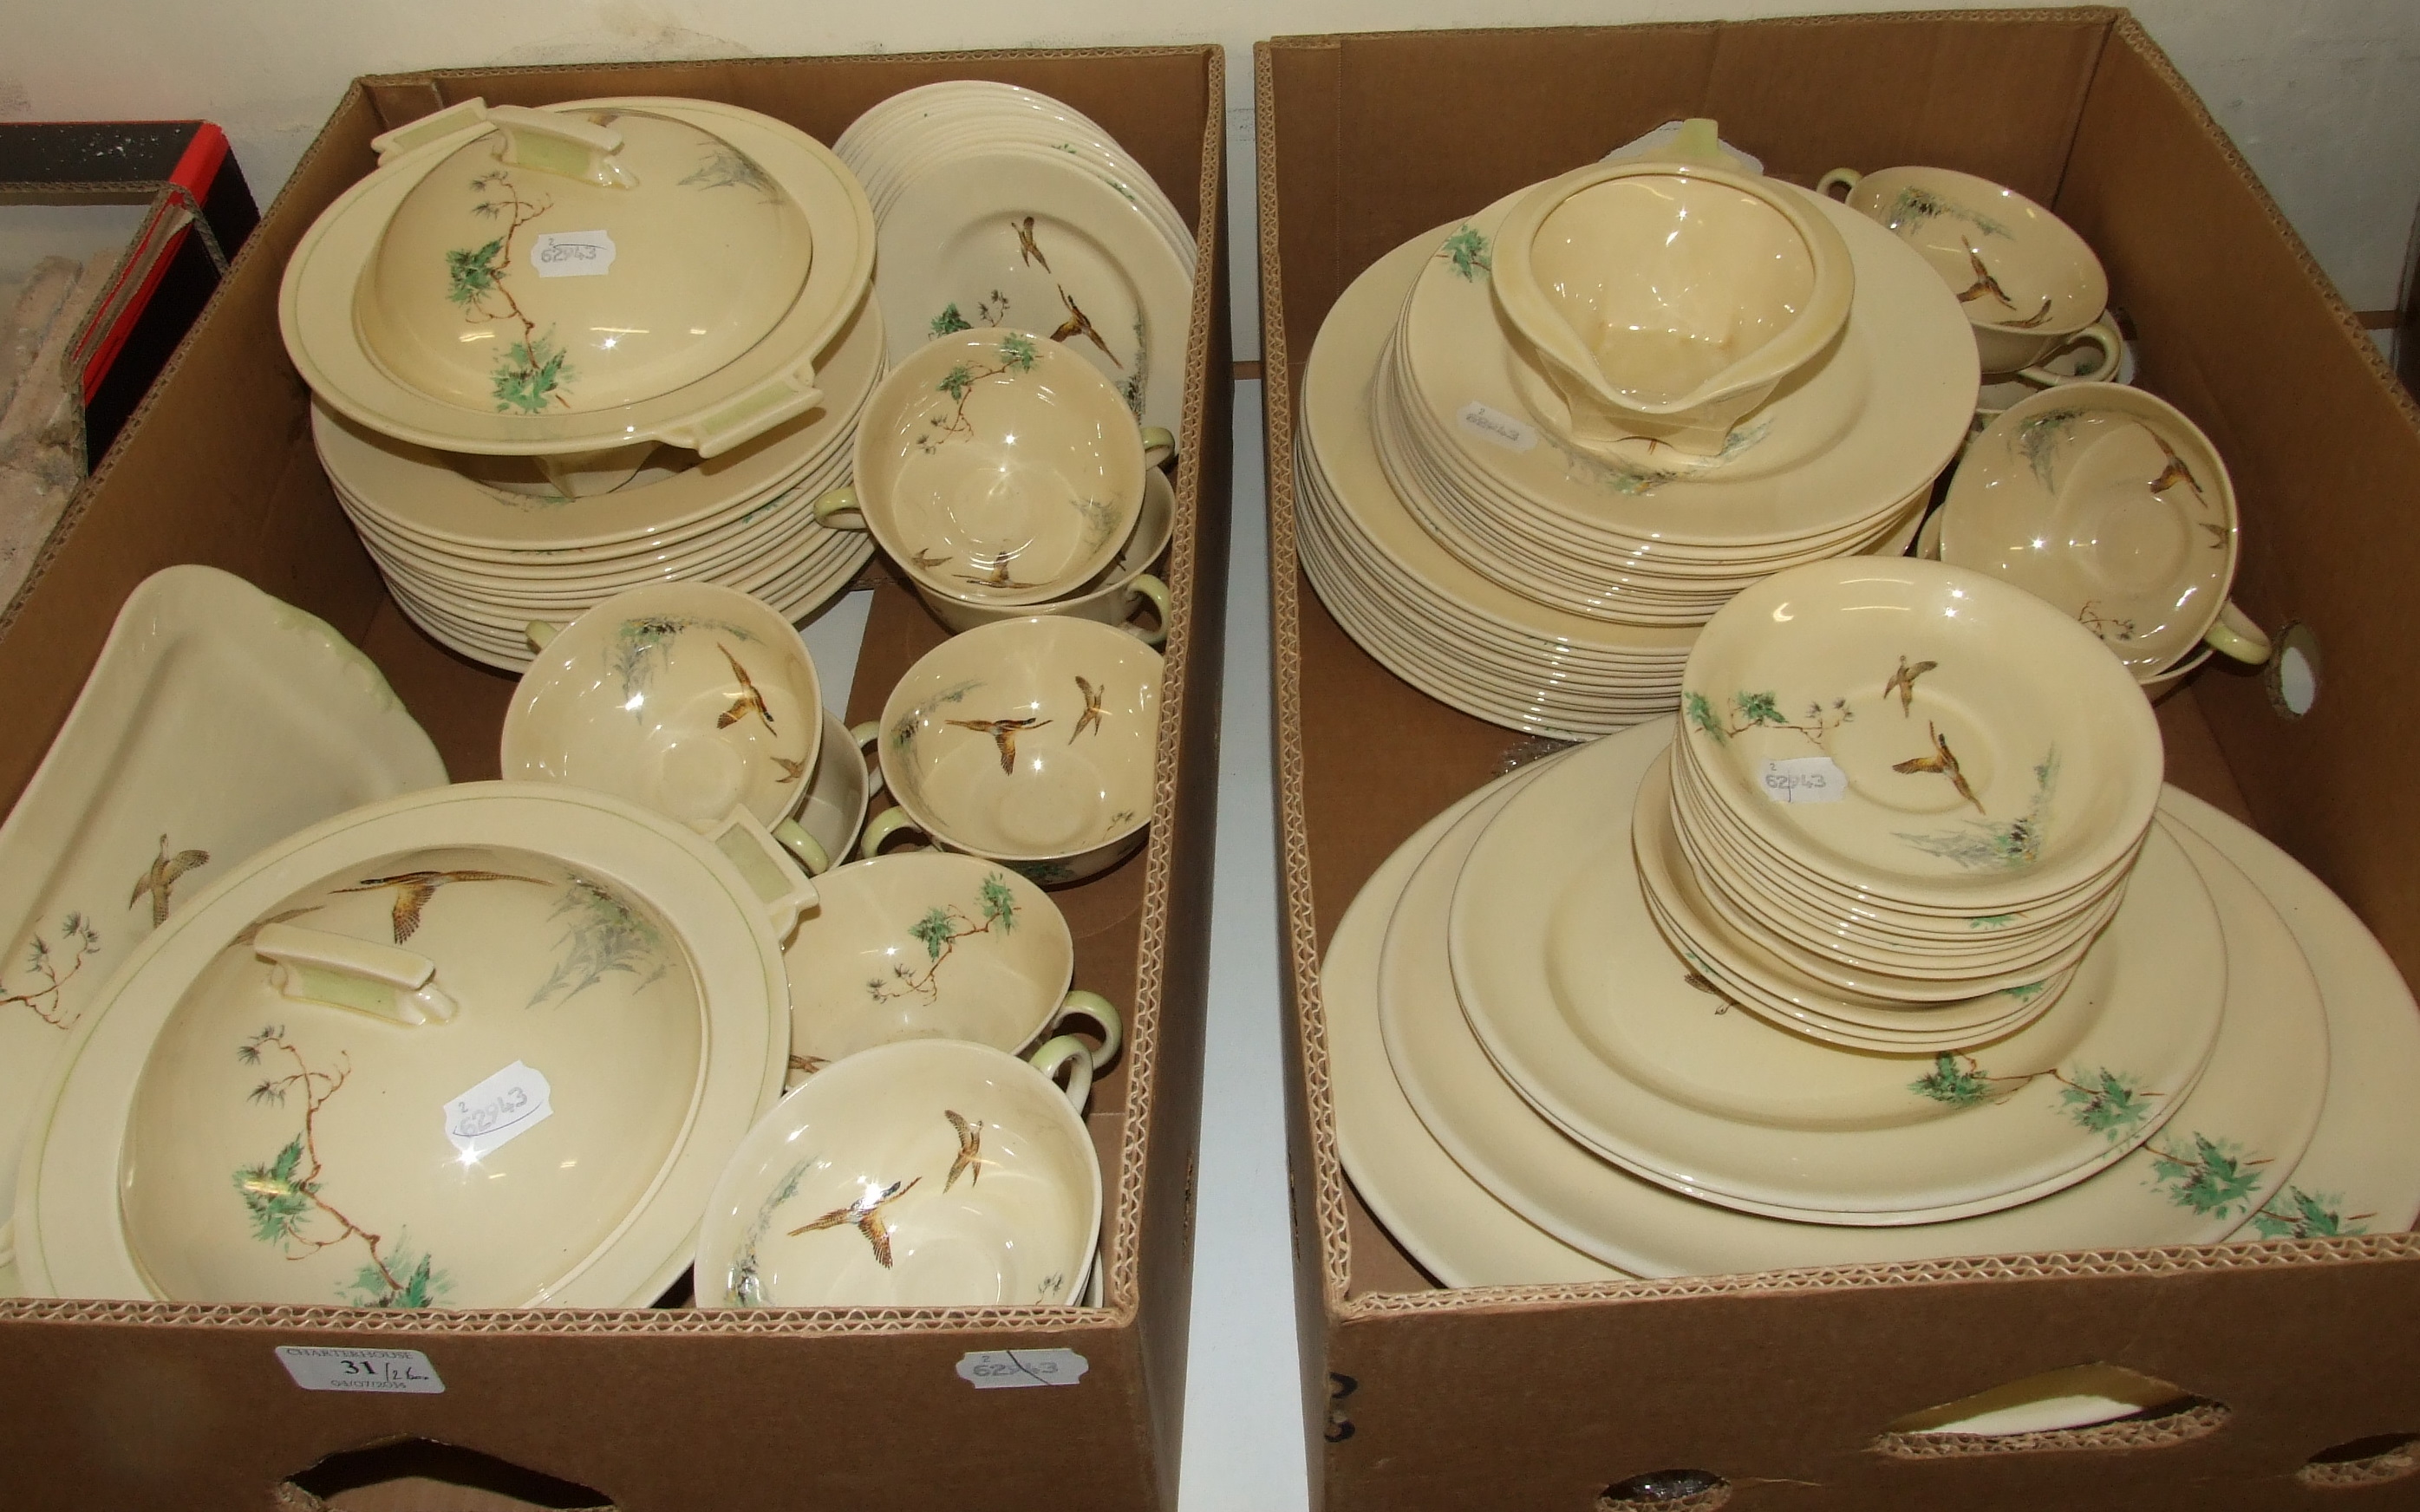 A Royal Doulton The Coppice pattern dinner service (2 boxes)   Condition report  Report by NG

The